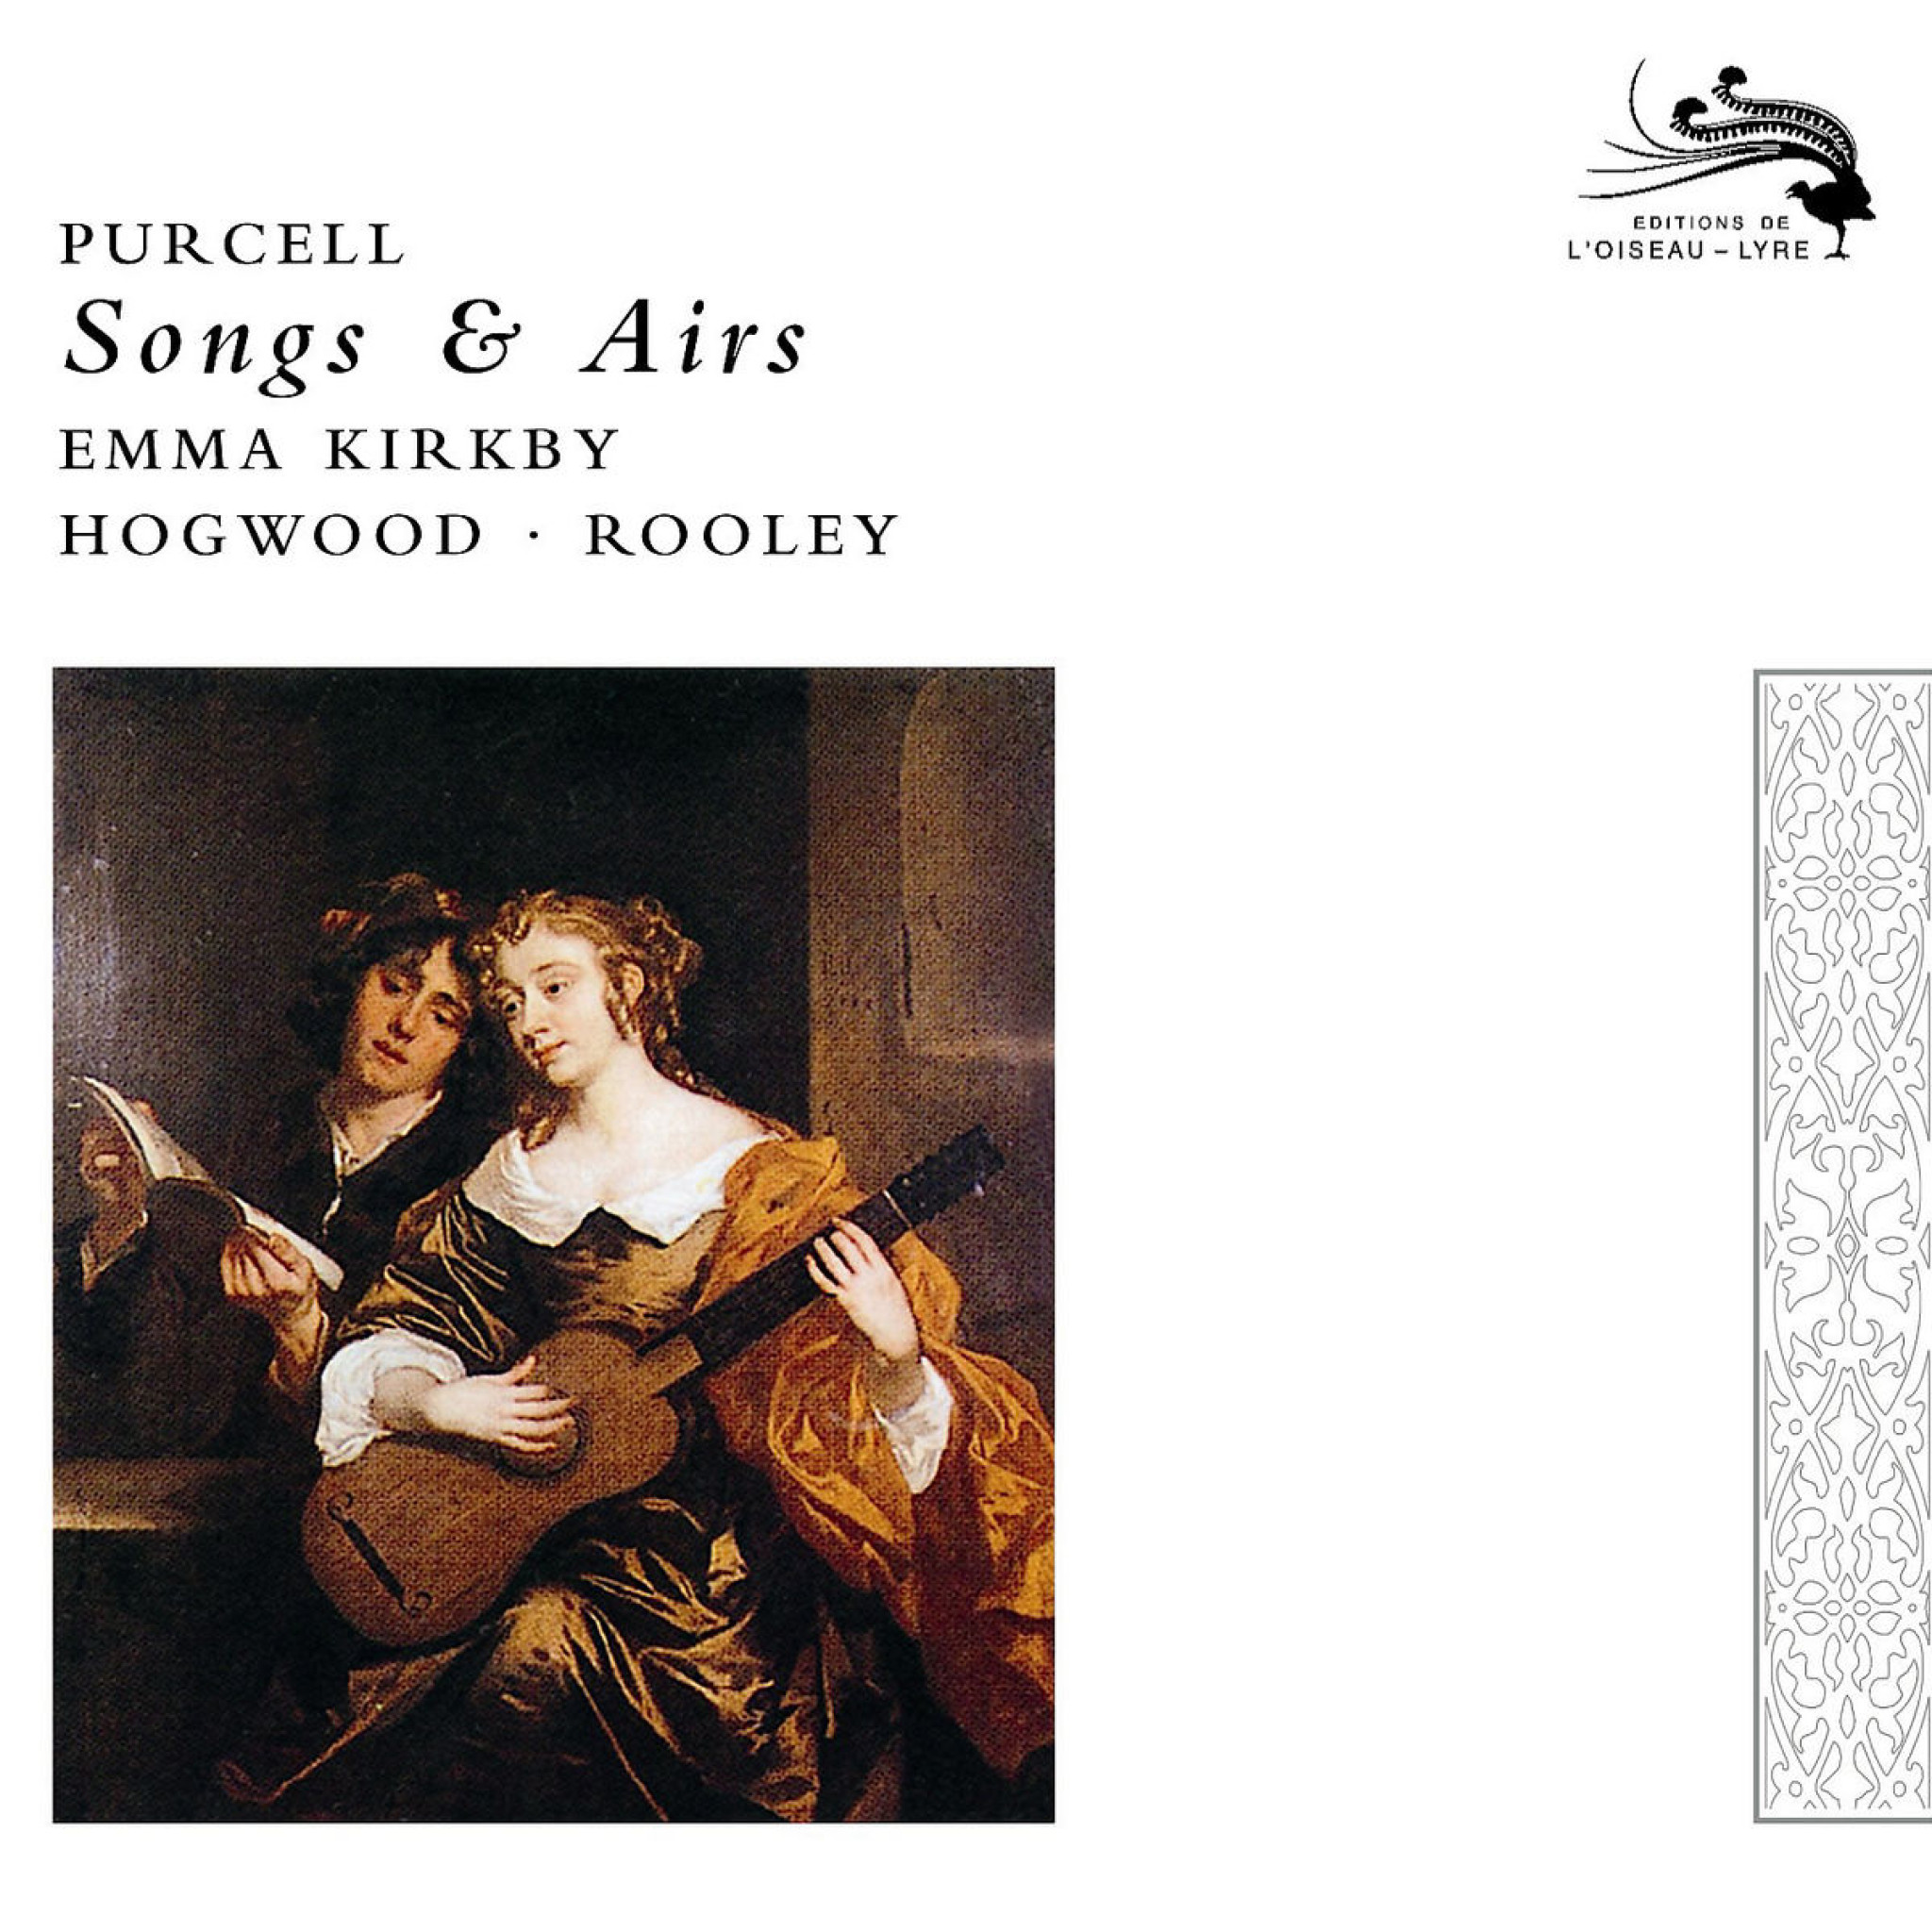 PURCELL